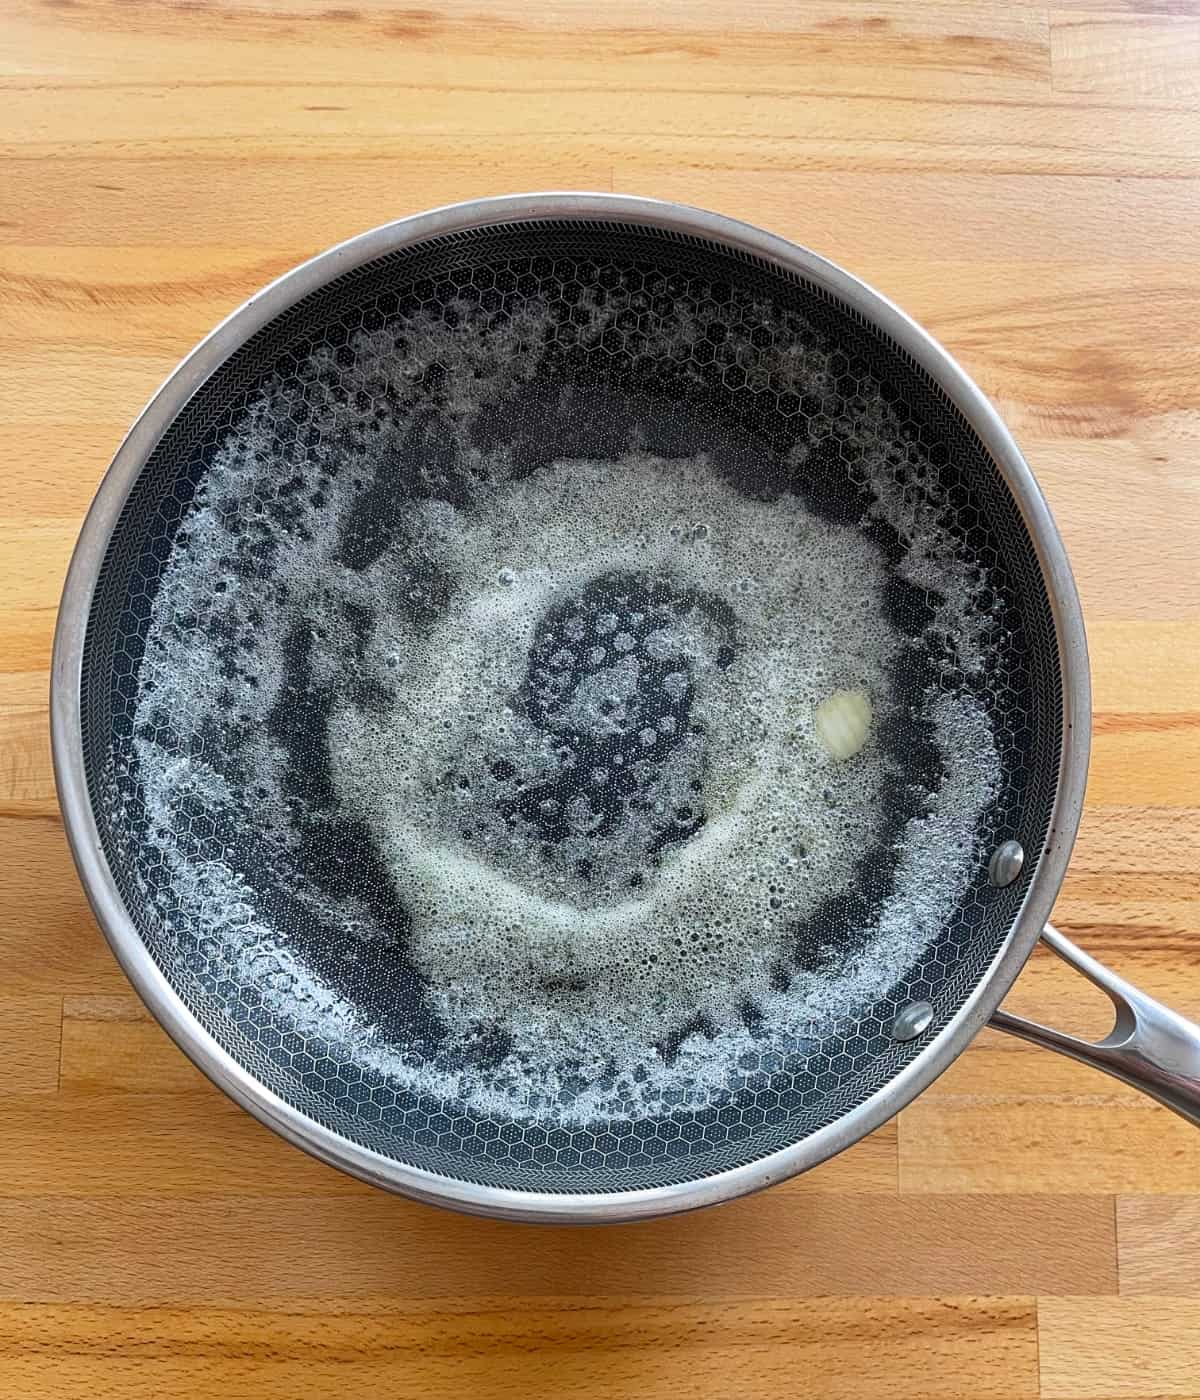 Melted butter in heated skillet.